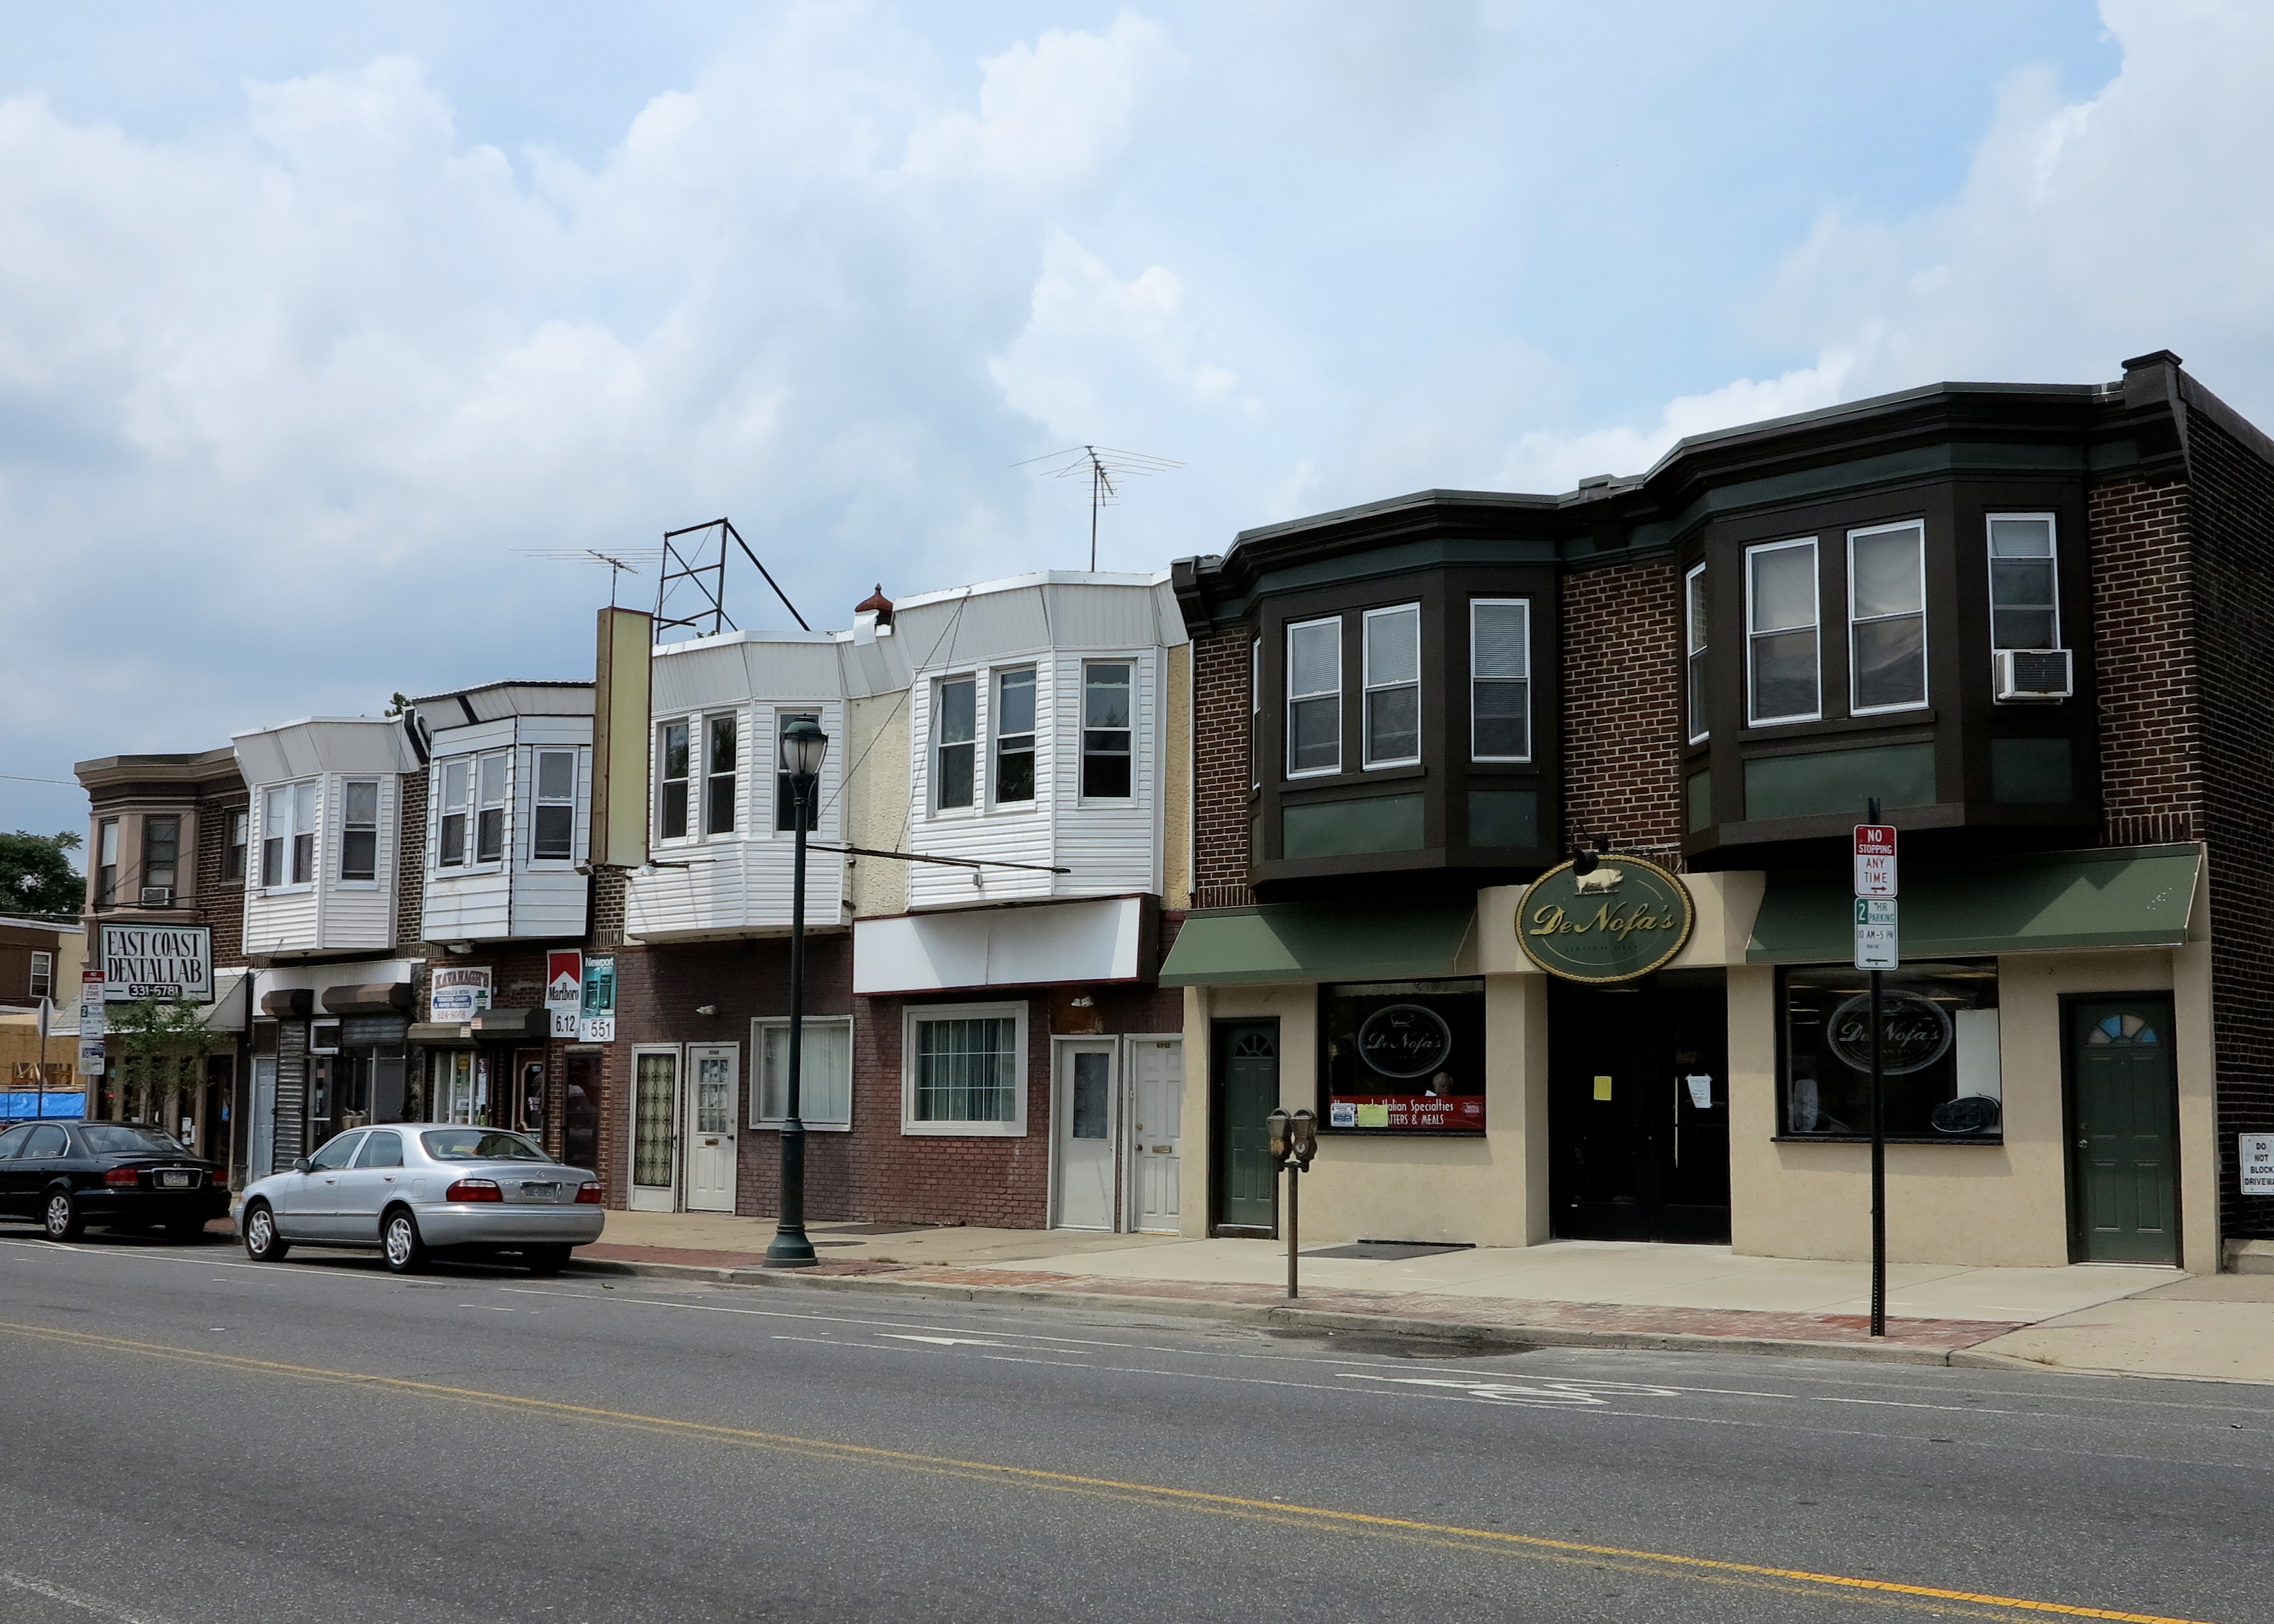 Both East Cost Dental Lab (6936 Torresdale) and Kavanagh's Tobacco (6938 Torresdale) next door will be given distinctive facelifts this fall.